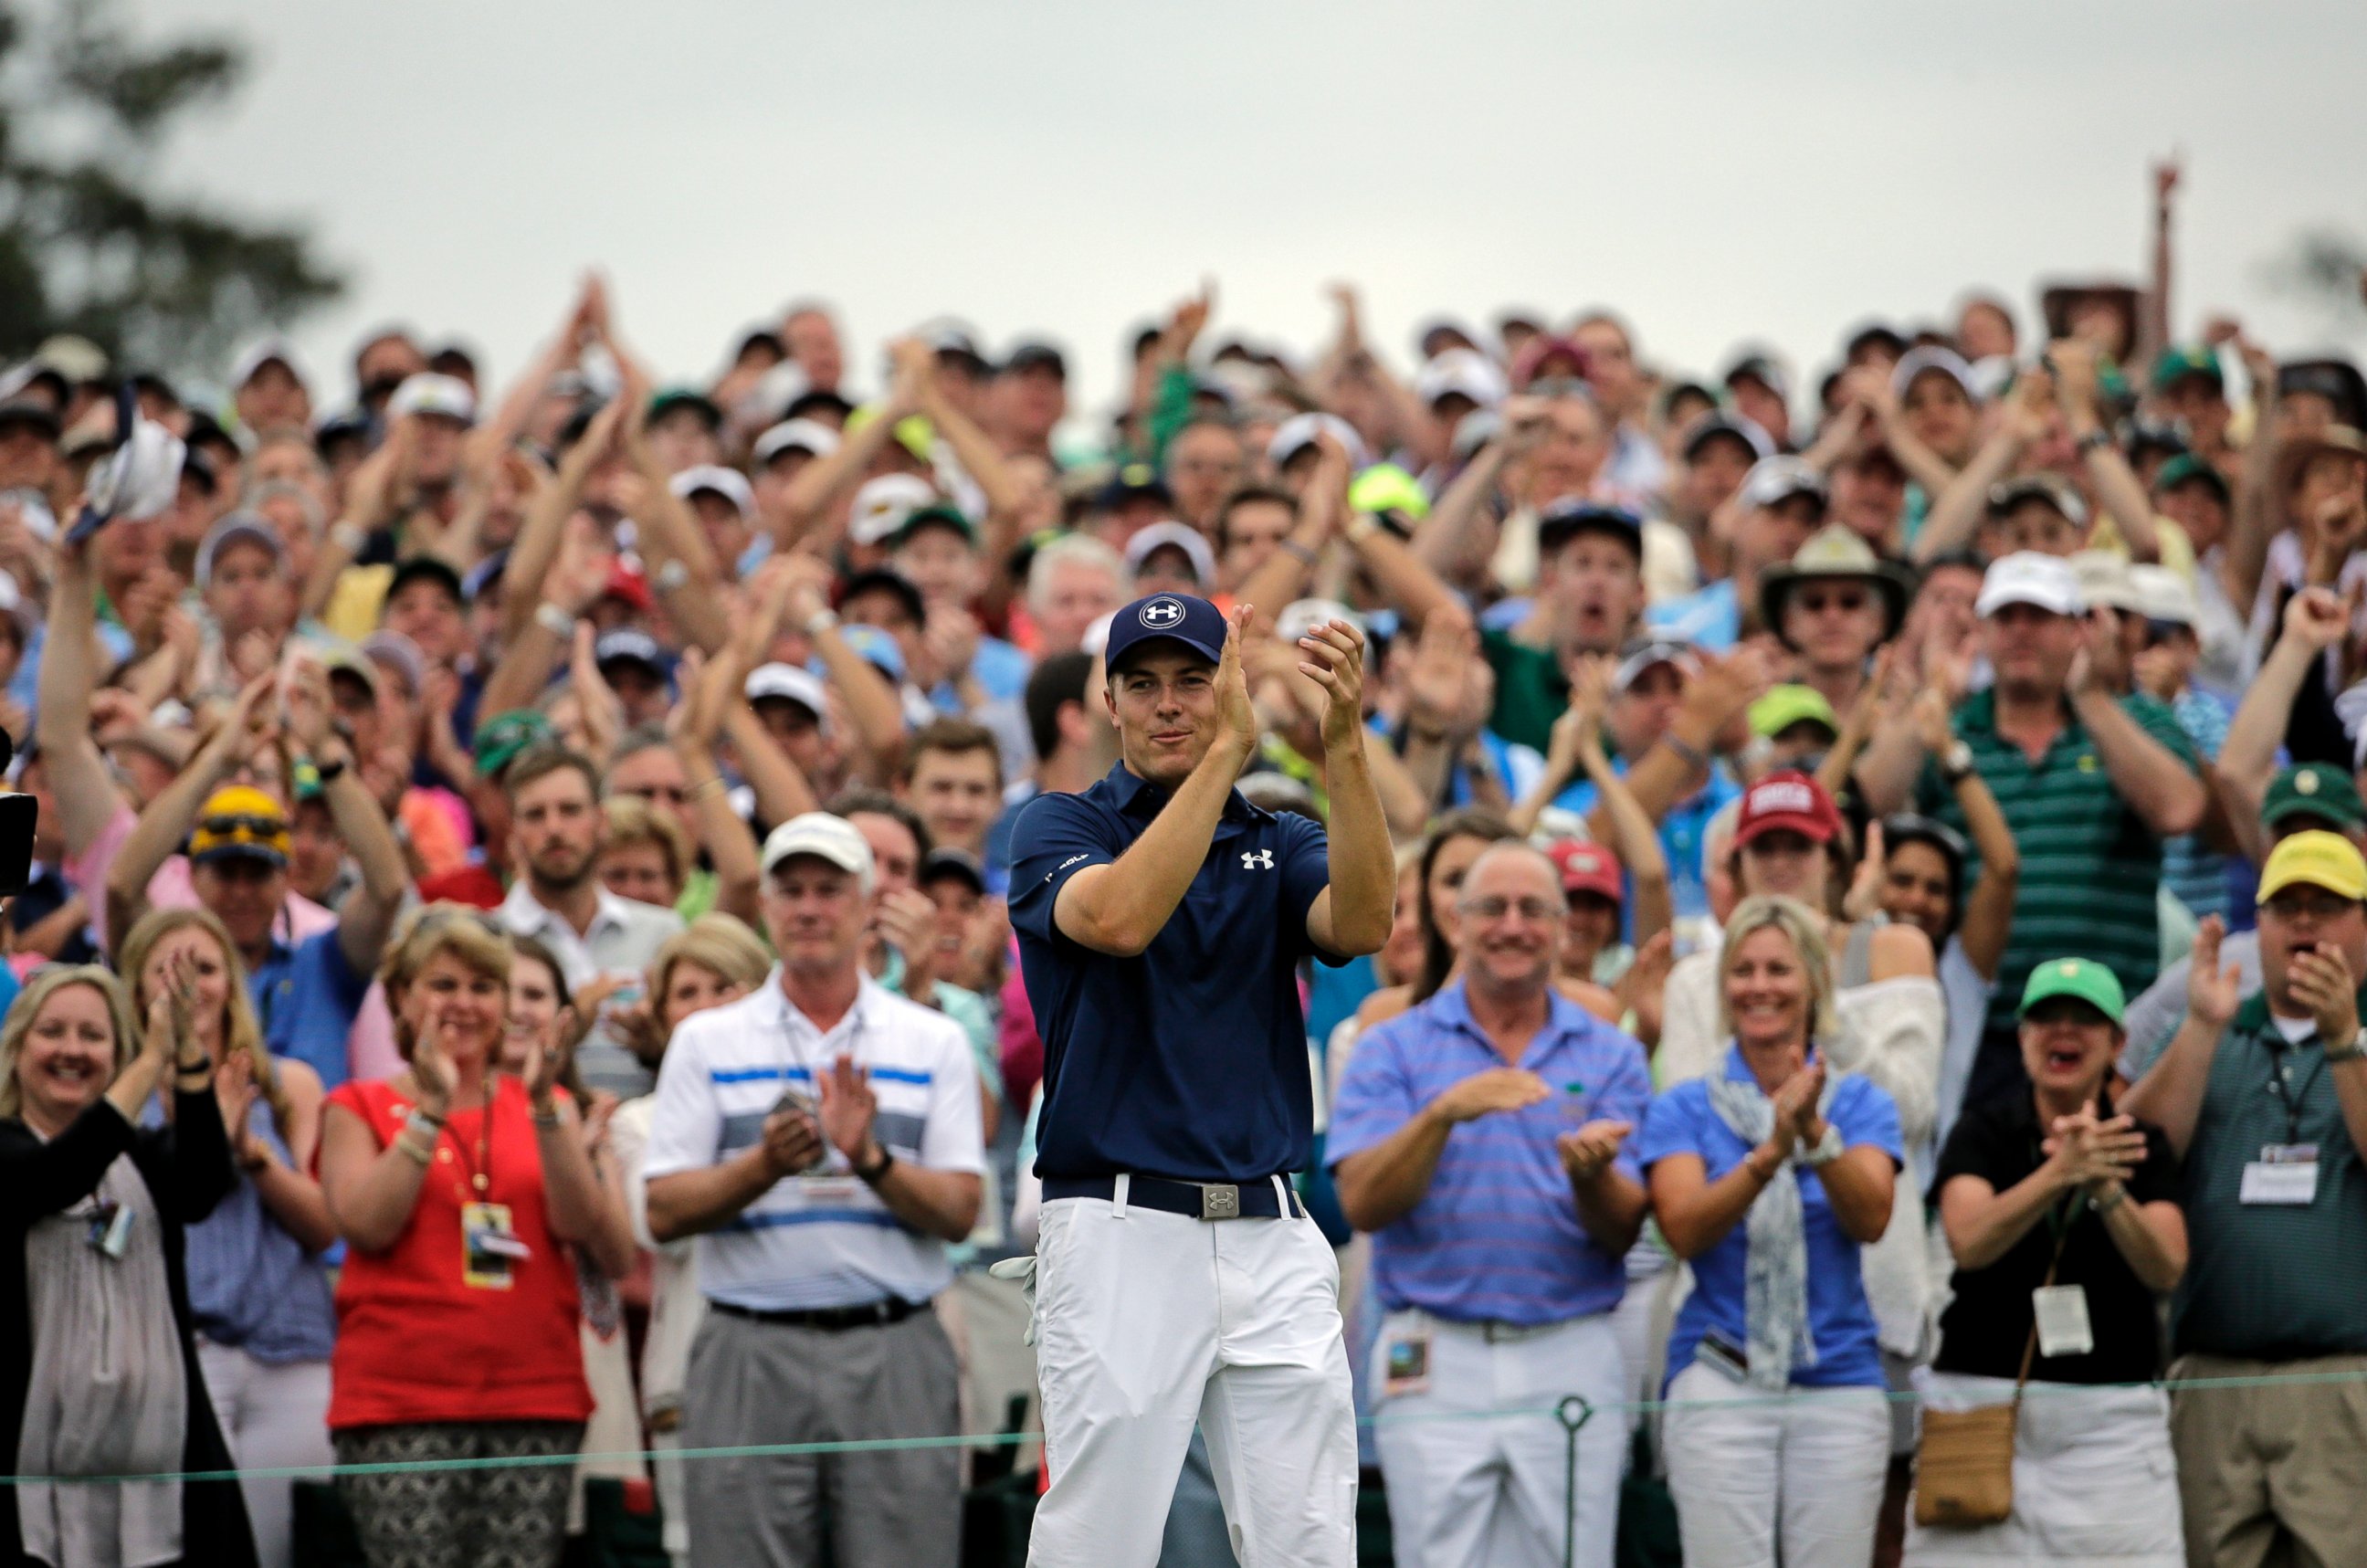 PHOTO: Jordan Spieth applauds after winning the Masters championship during the fourth round of the Masters golf tournament Sunday, April 12, 2015, in Augusta, Ga.